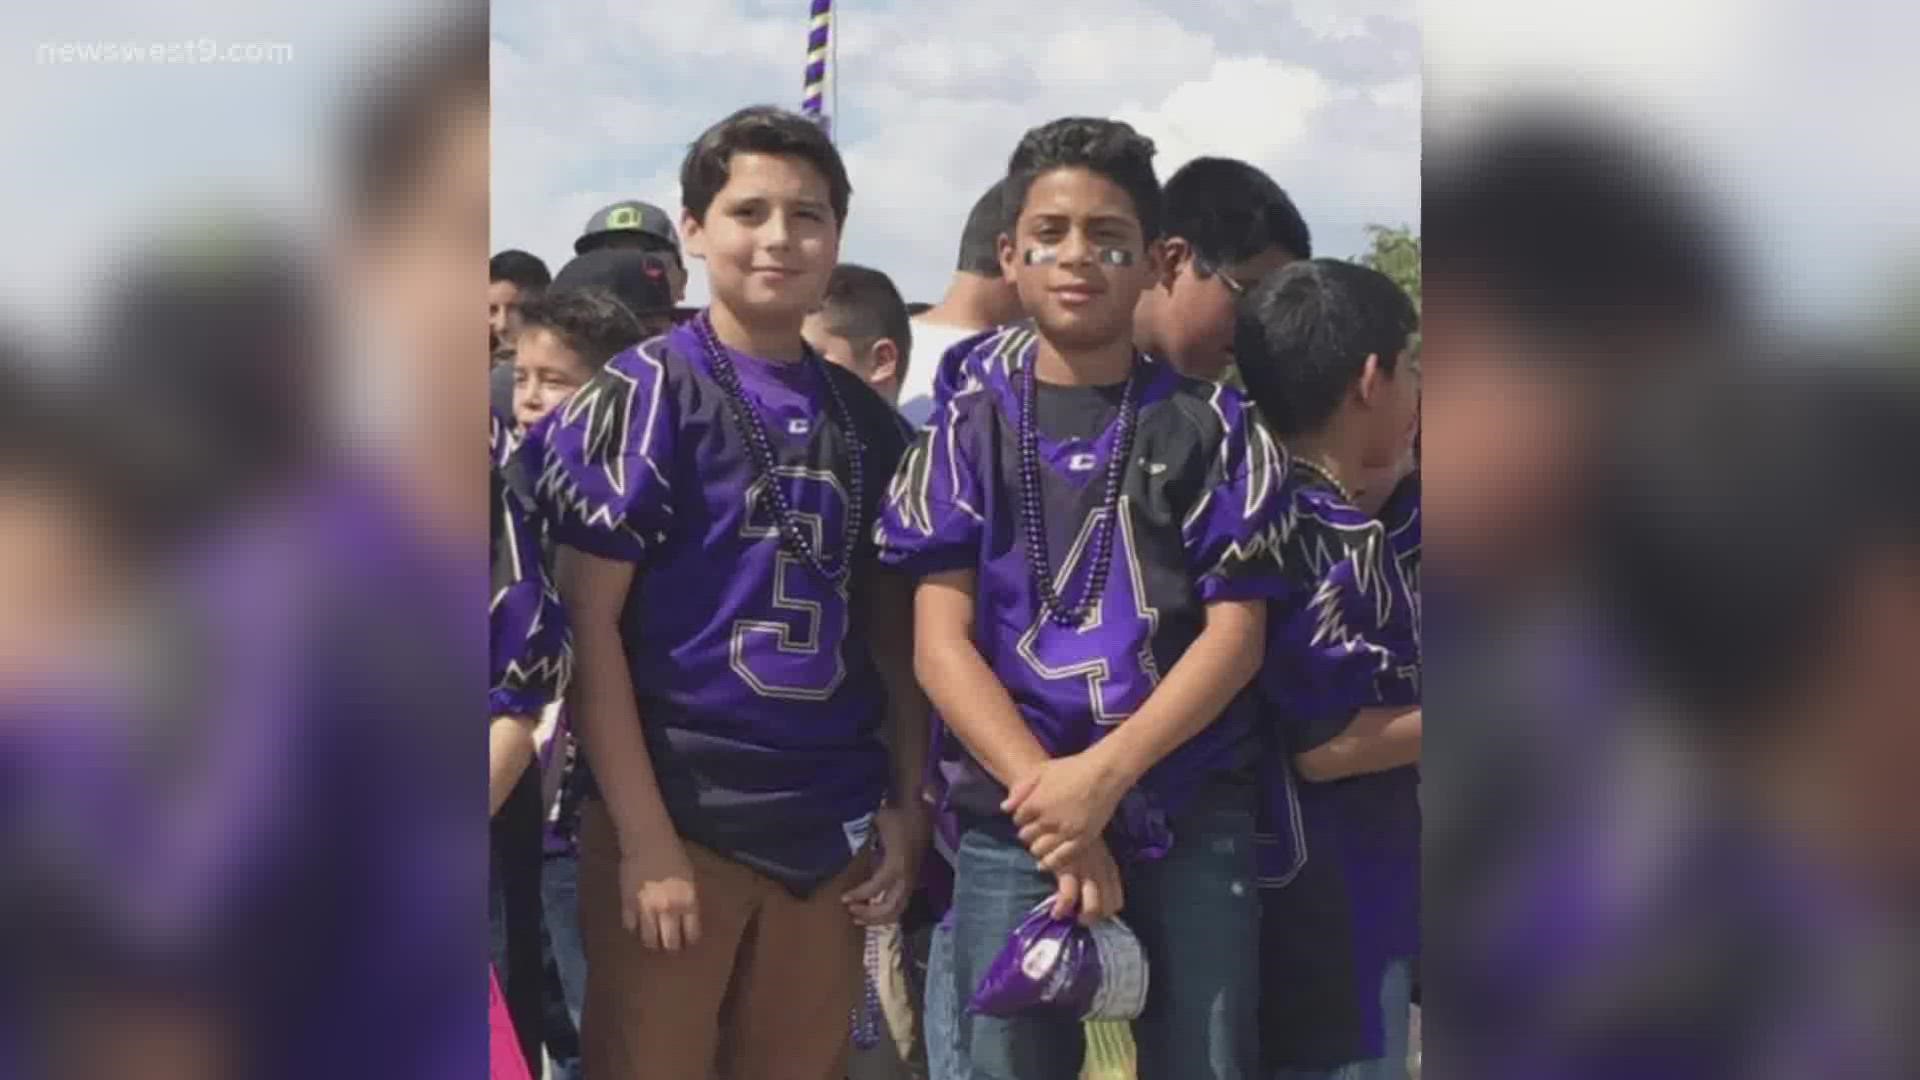 Bishop and Rodriguez grew up together in Crane, and now are in Midland putting up big numbers for their schools.